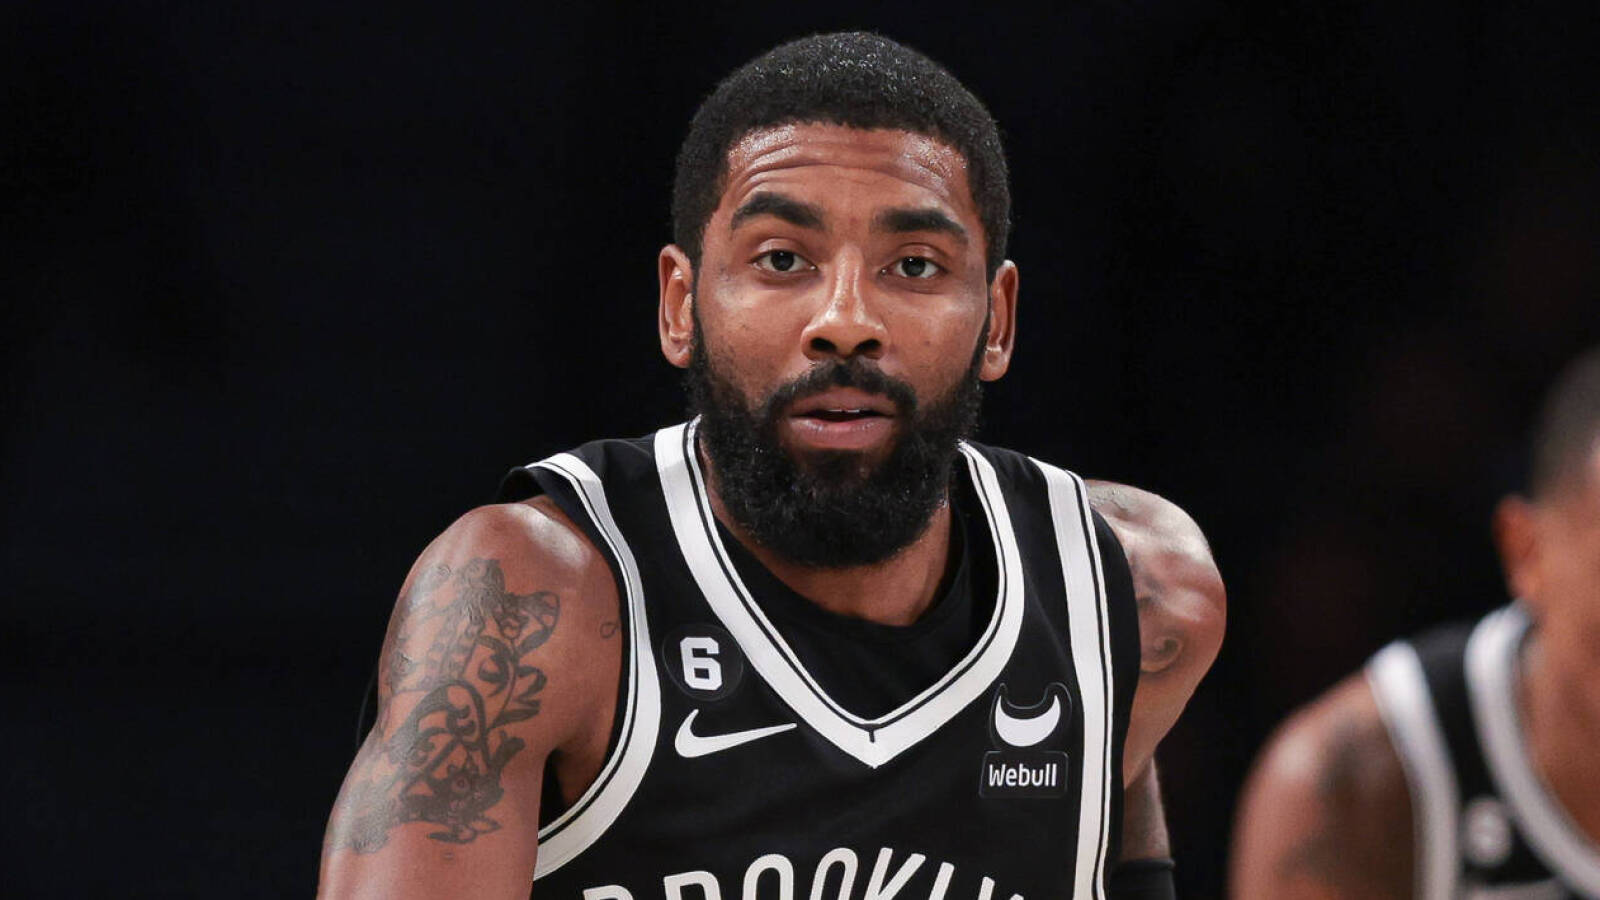 Nets GM Sean Marks: Kyrie Irving apology 'not enough' to return from suspension